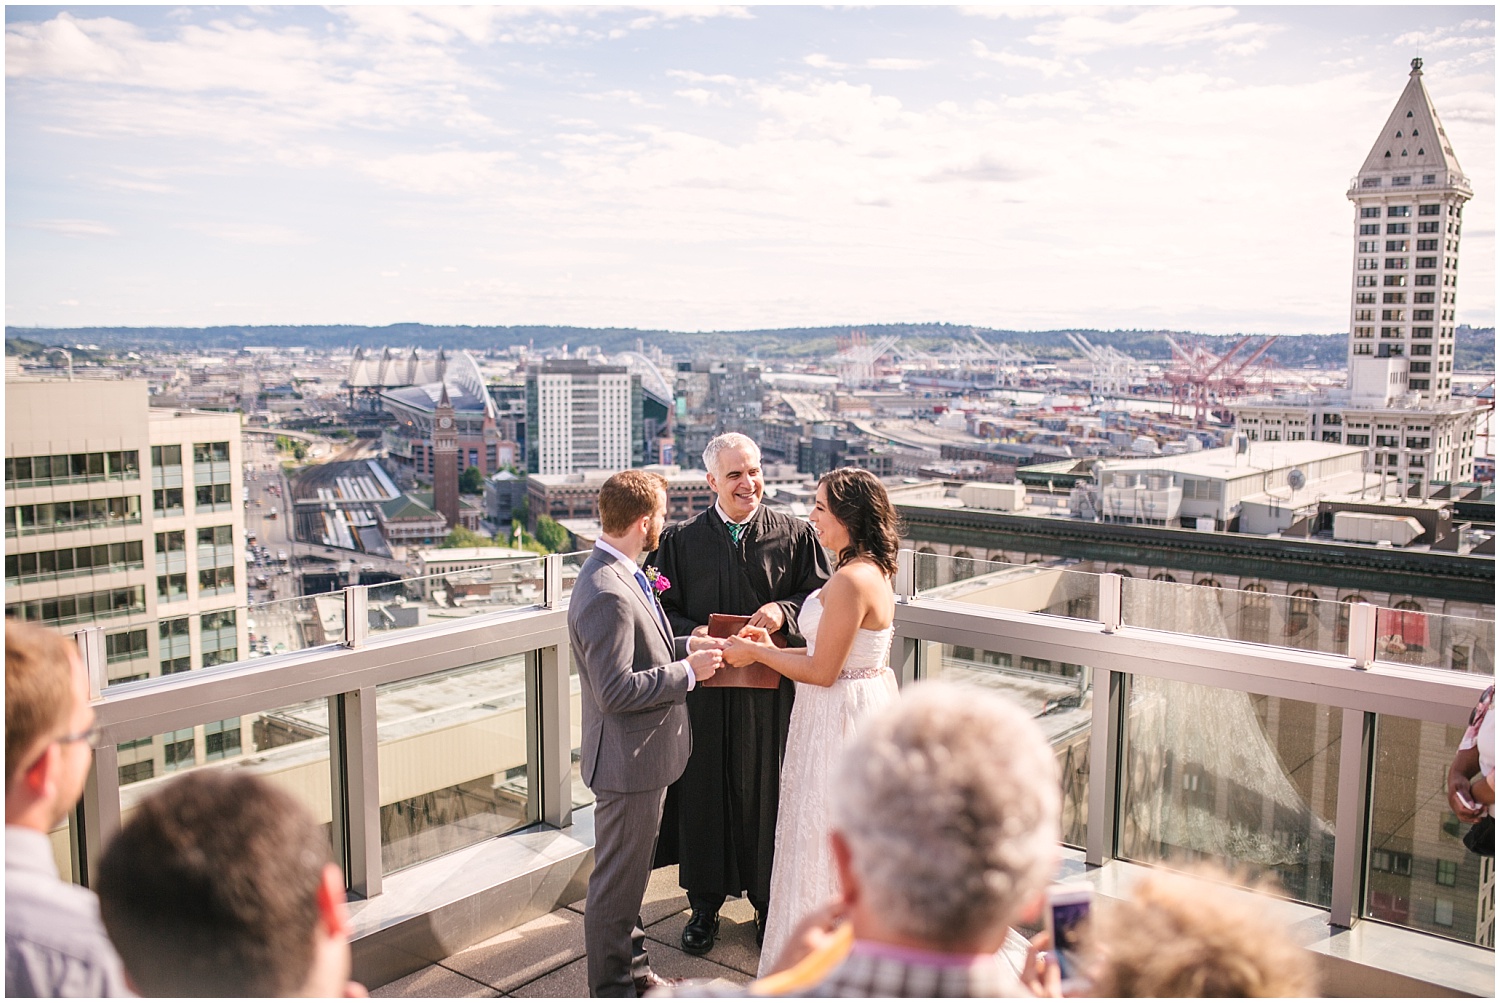 Seattle Municipal Court wedding ceremony on the rooftop, with a view of downtown Seattle.